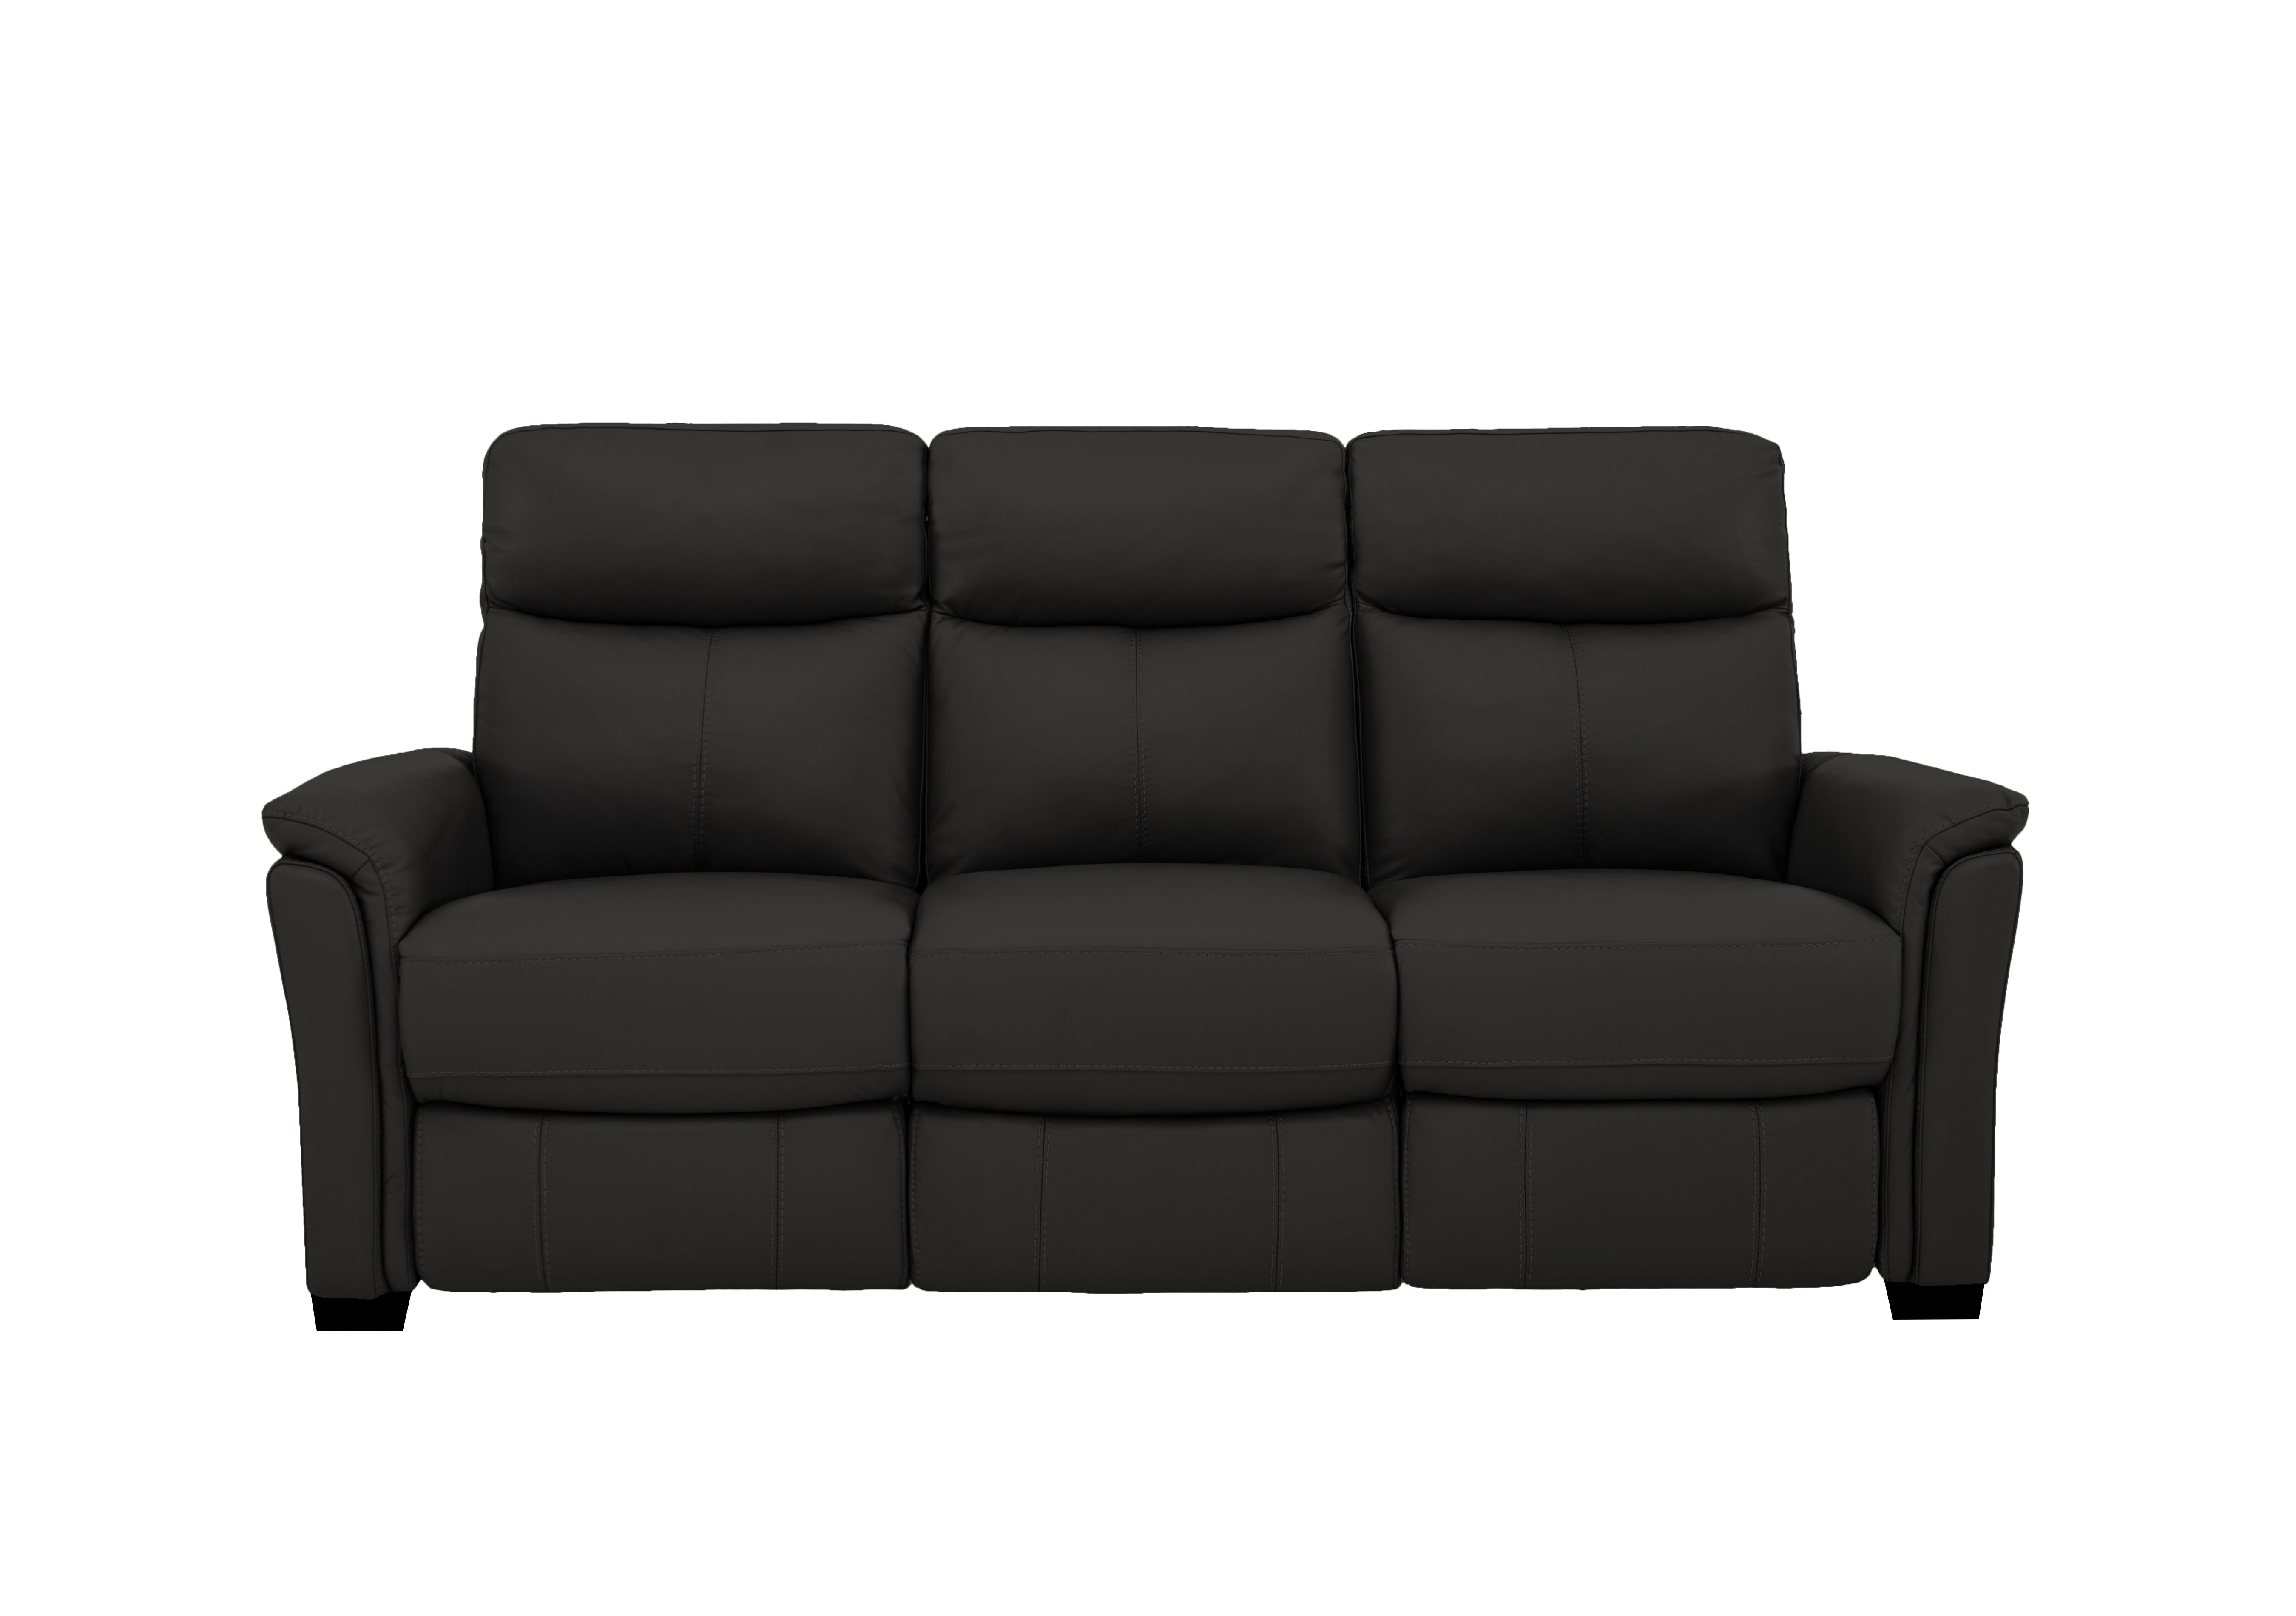 Compact Collection Piccolo 3 Seater Leather Static Sofa in Bv-3500 Classic Black on Furniture Village